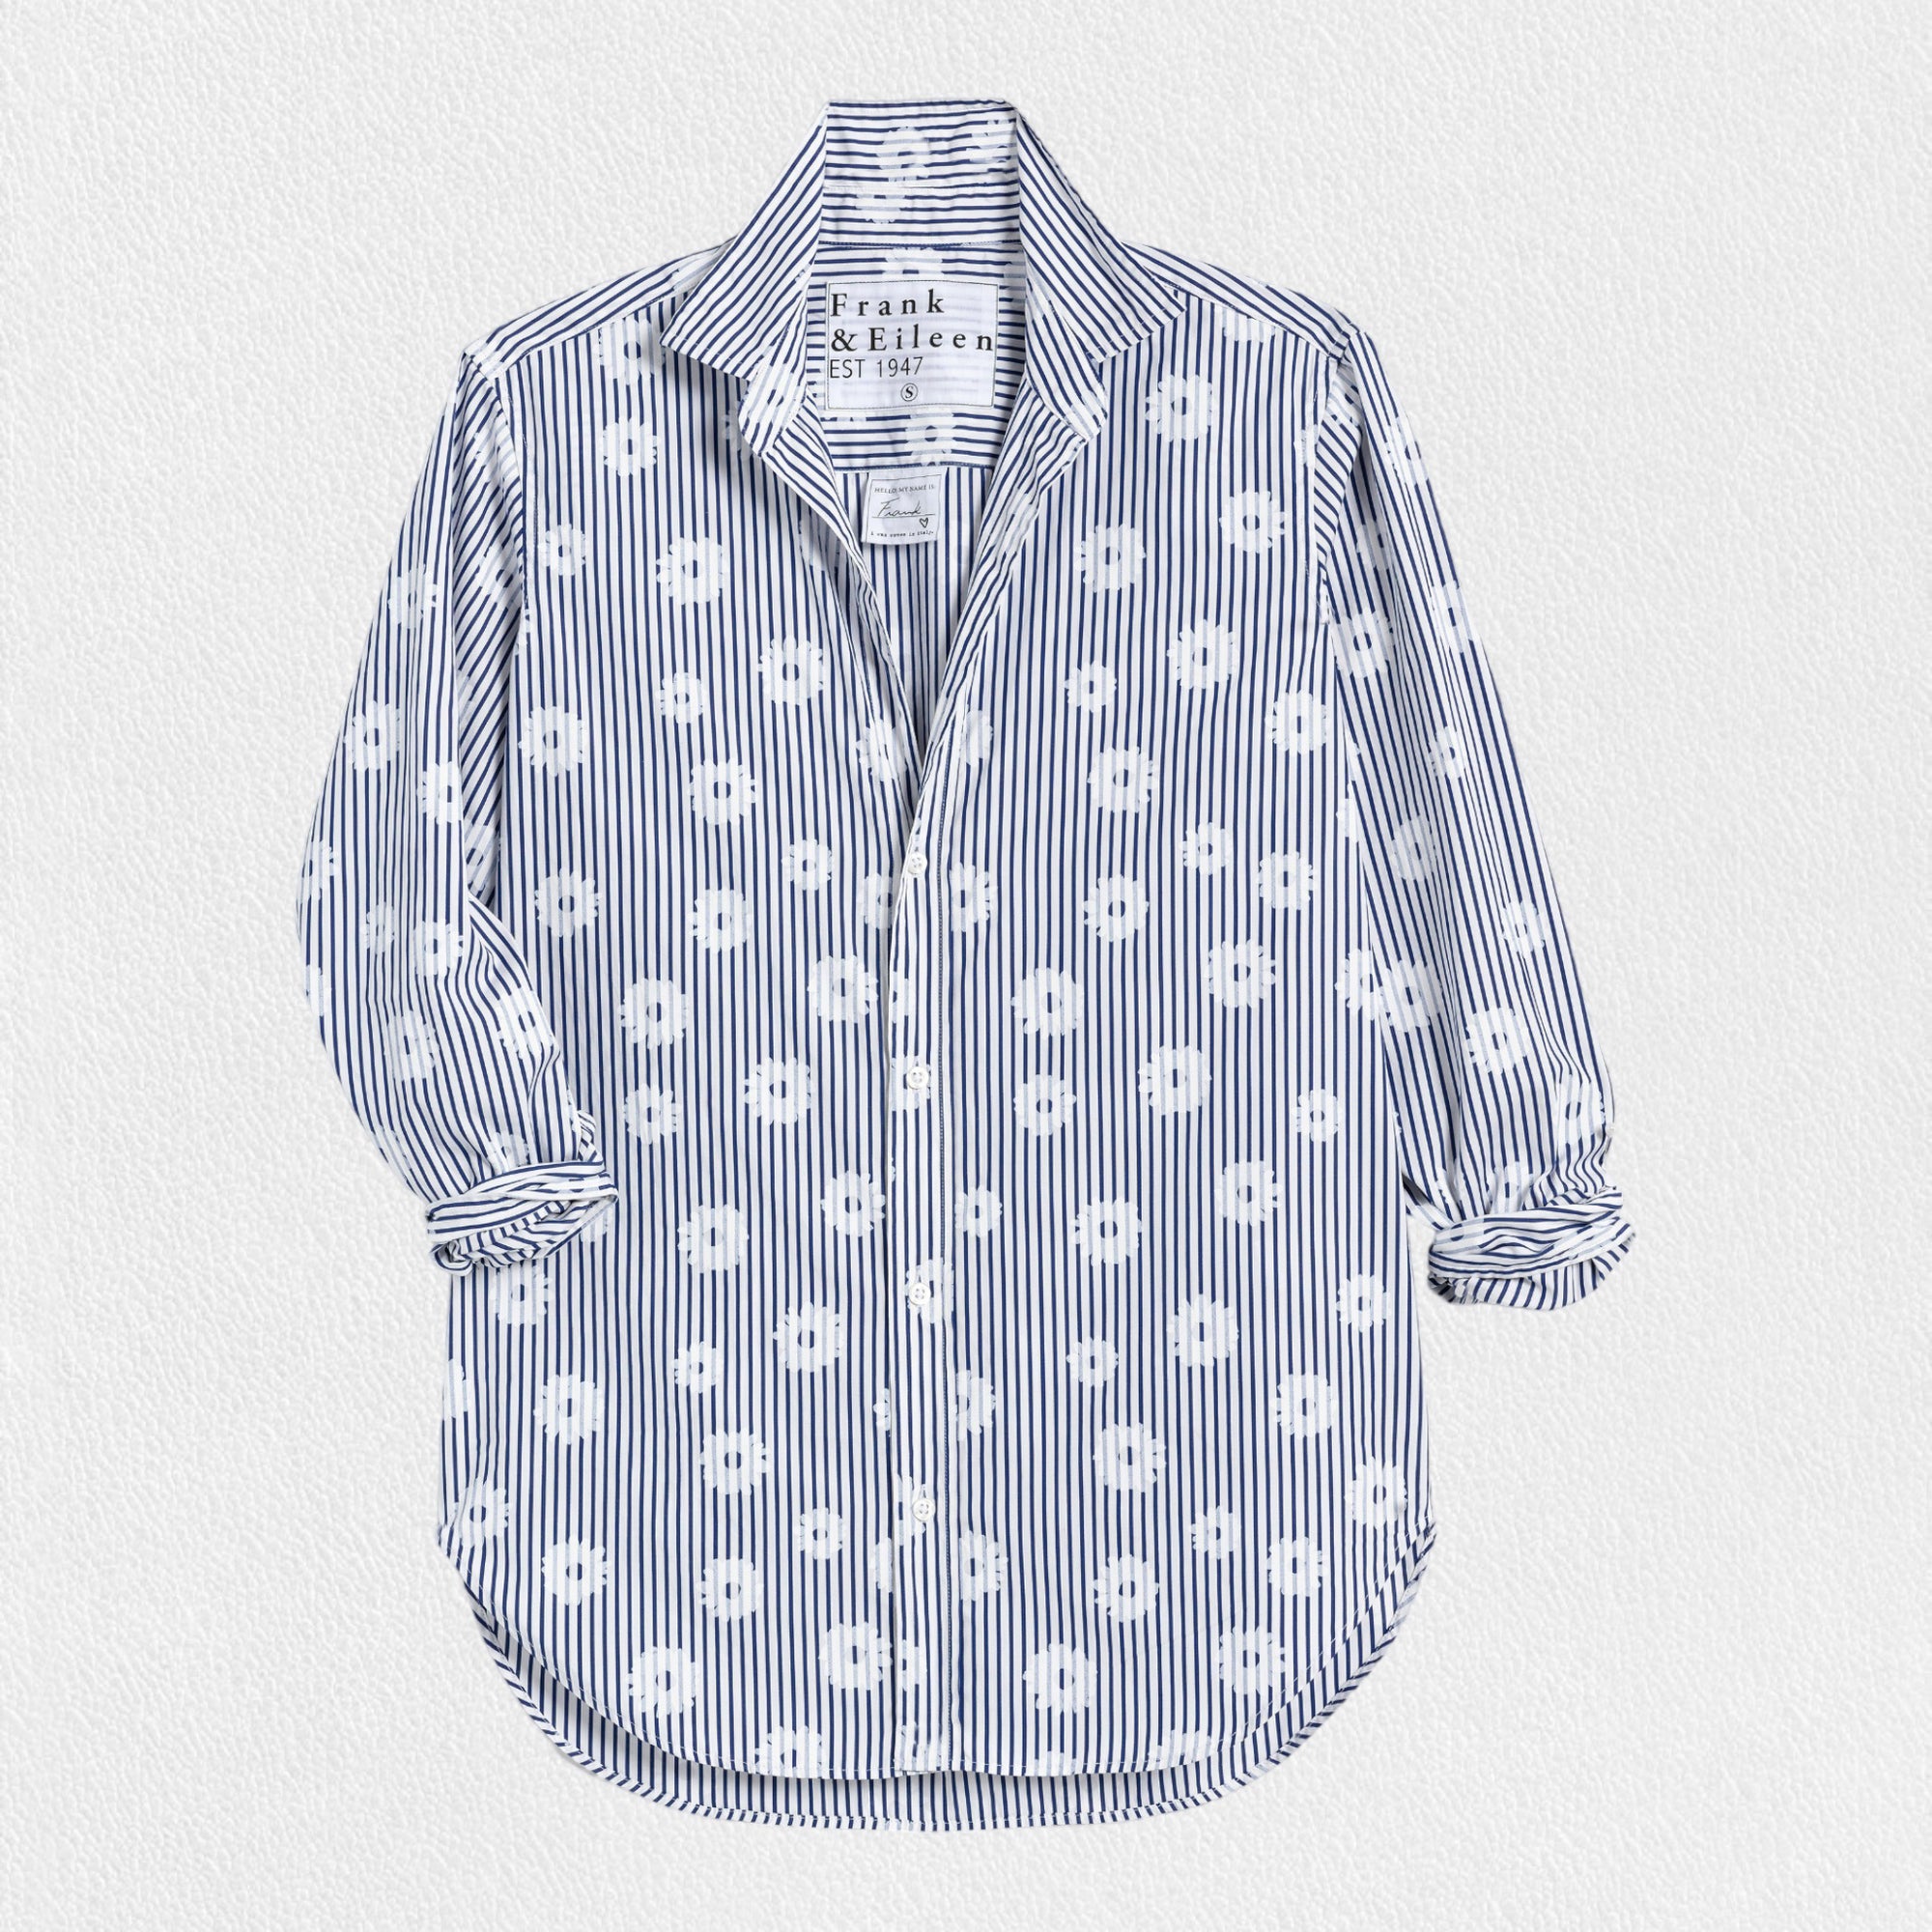 FRANK AND EILEEN - FRANK CLASSIC BUTTON UP SHIRT IN WHITE FLOWERS